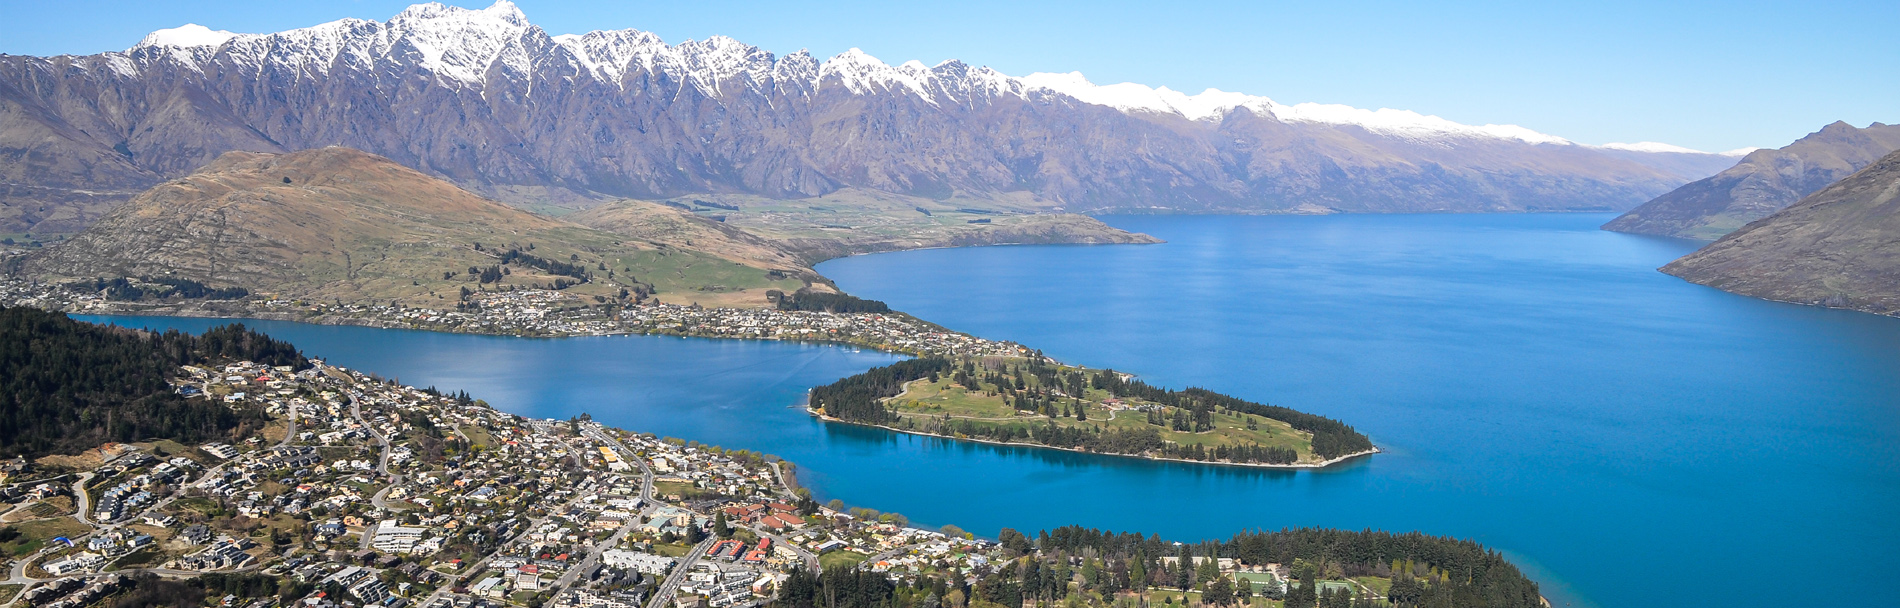 New Zealand Tour Package - 9 Nights